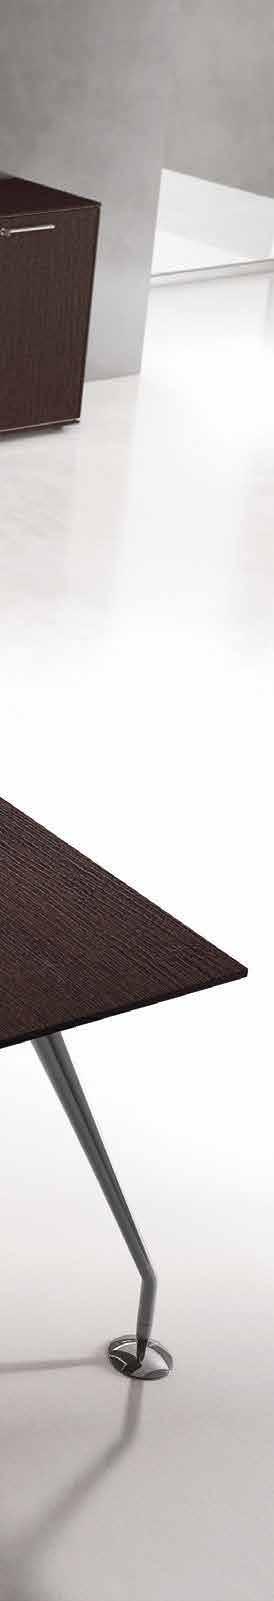 ENOSI provides a wide range of materials and finishes